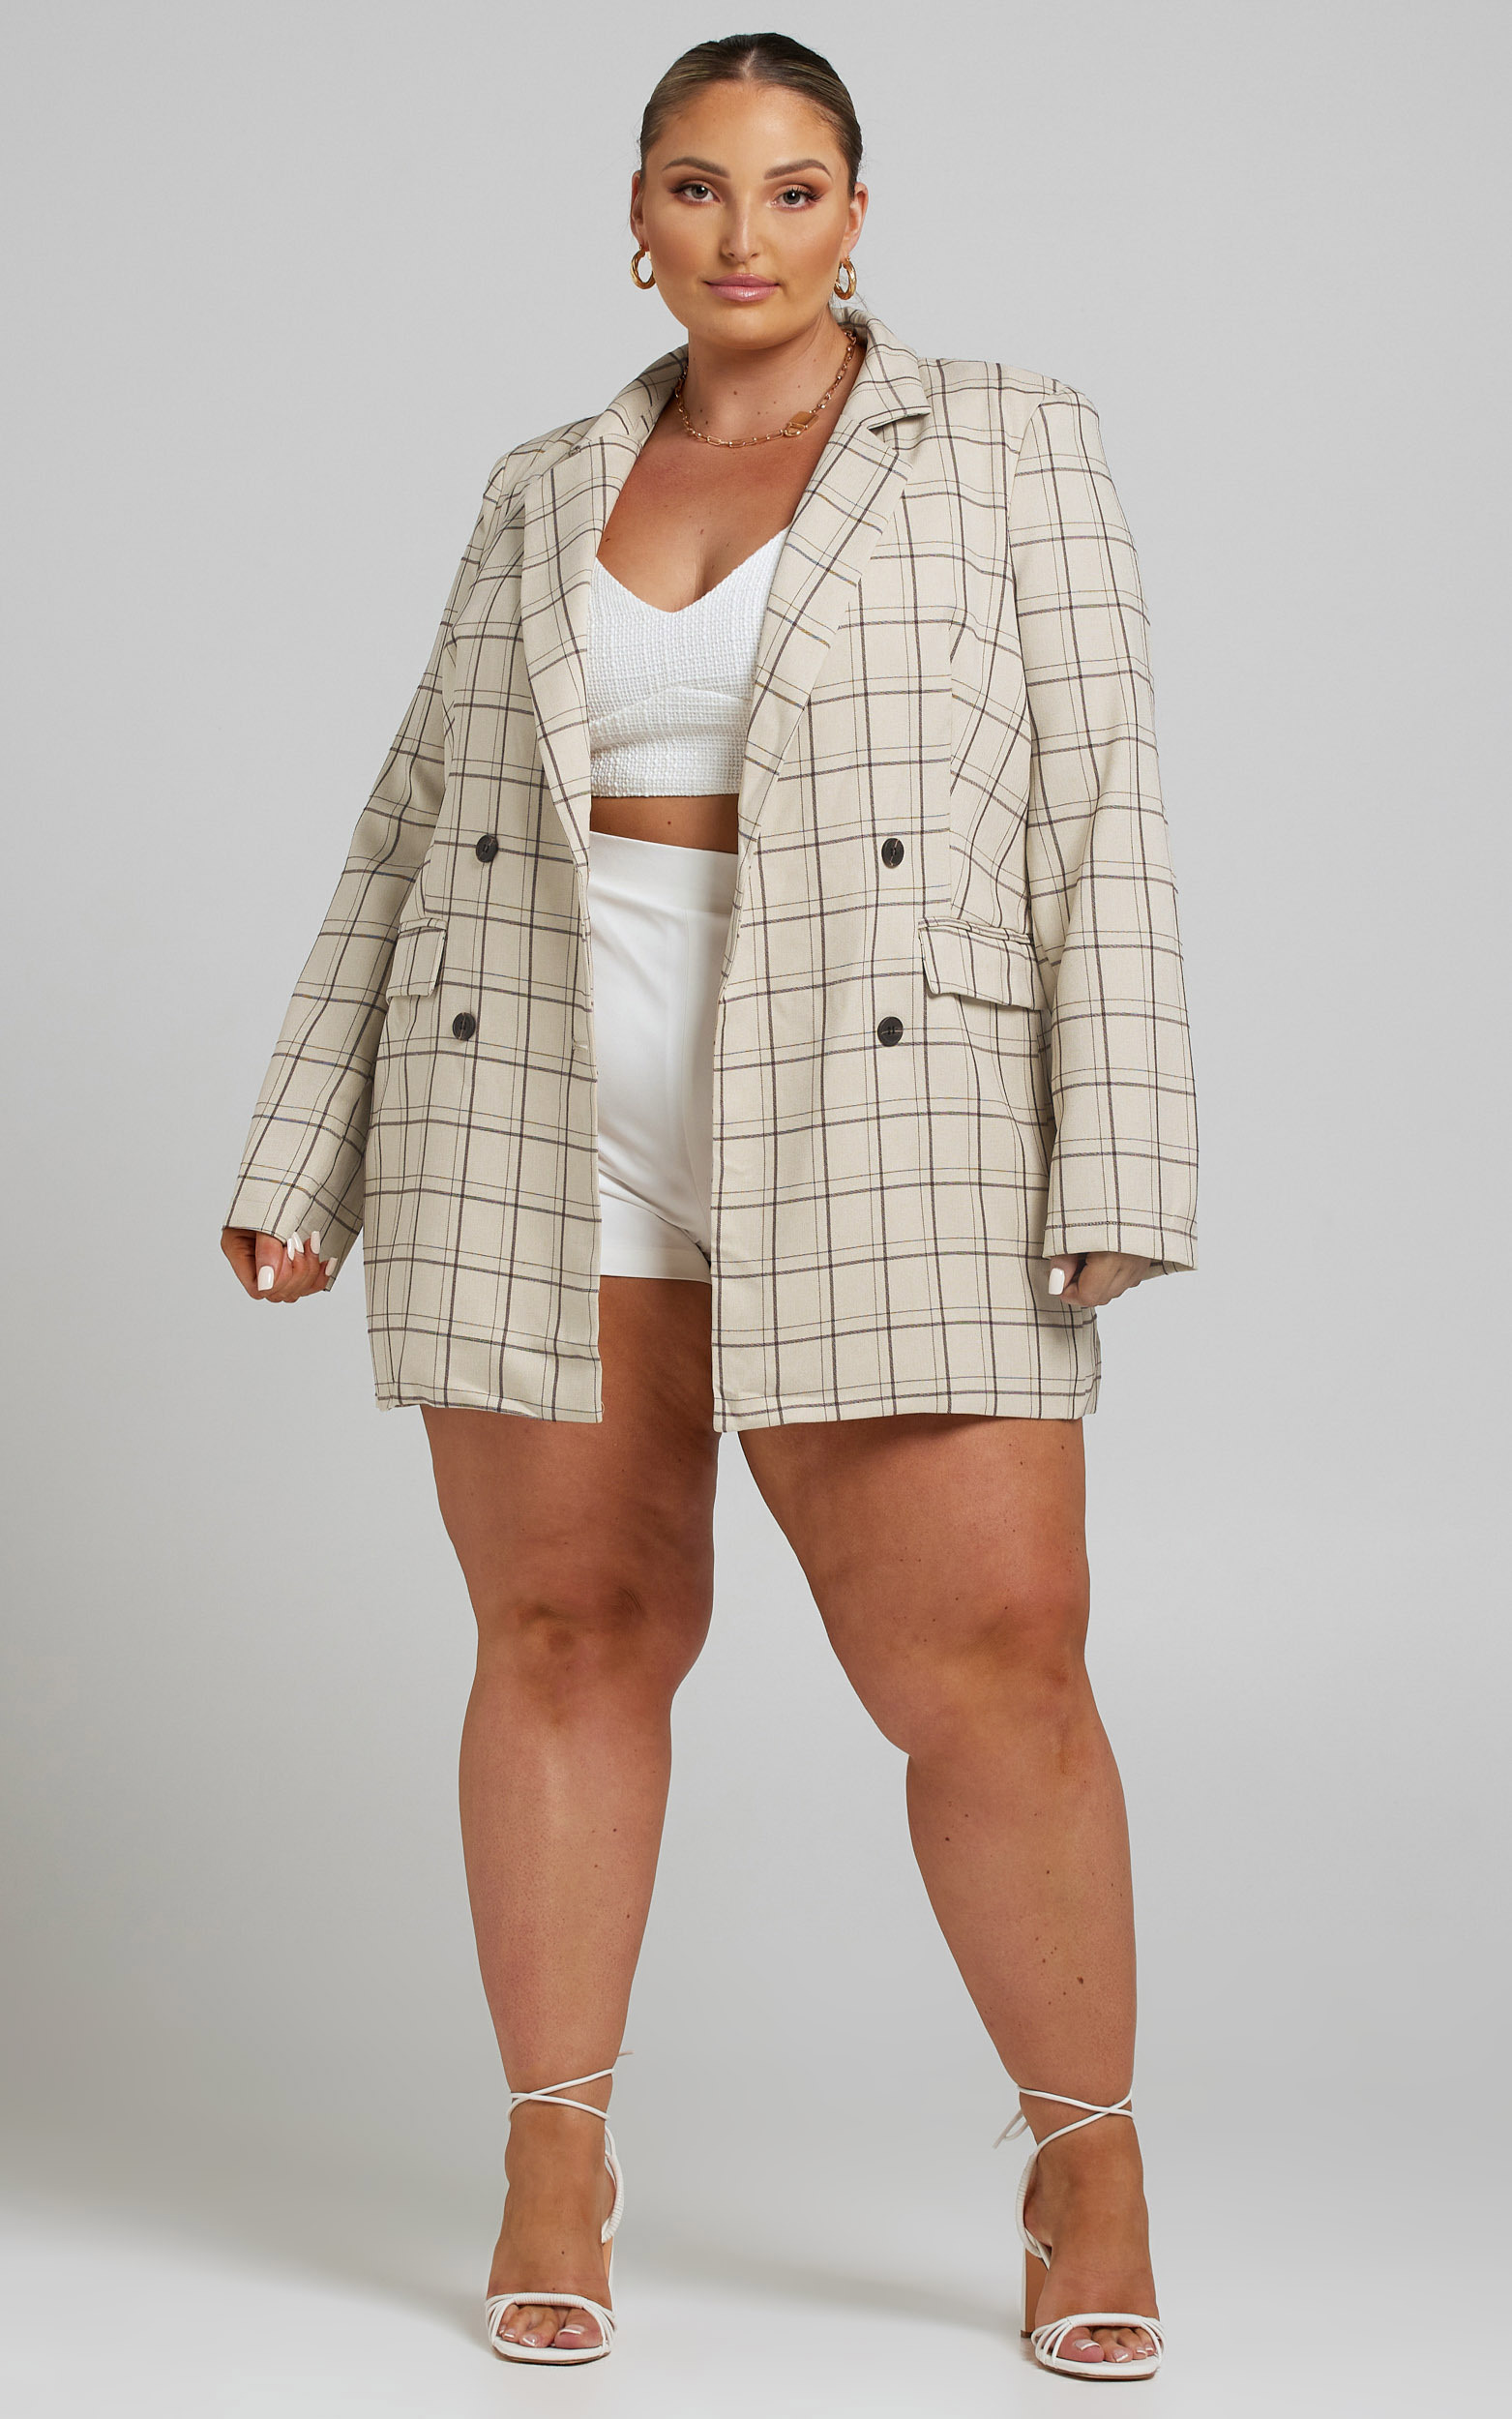 Sort It Out Blazer in Cream Check - 04, CRE4, hi-res image number null